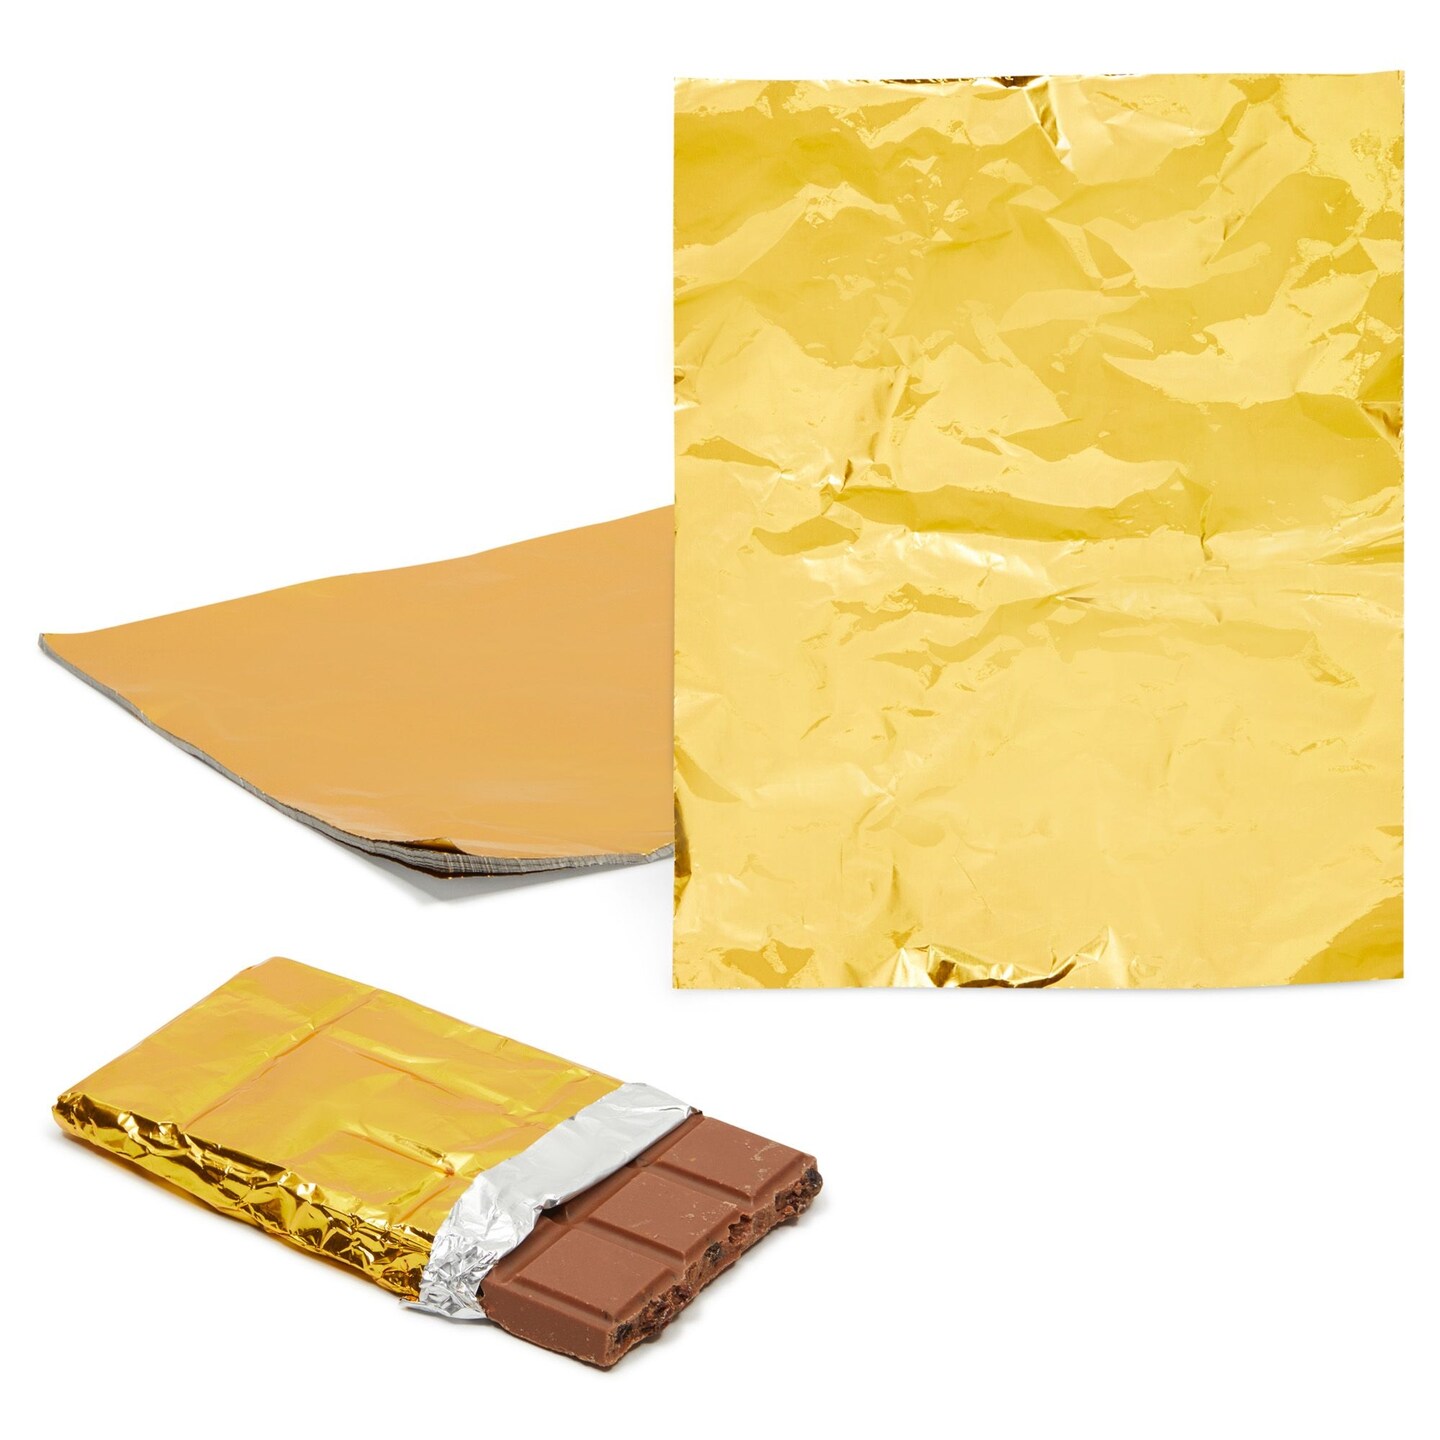 100 Pieces Candy Bar Wrappers, Gold Aluminum Foil Wrapping Paper for Chocolate, Caramel, Sweets (6 x 7.5 In)